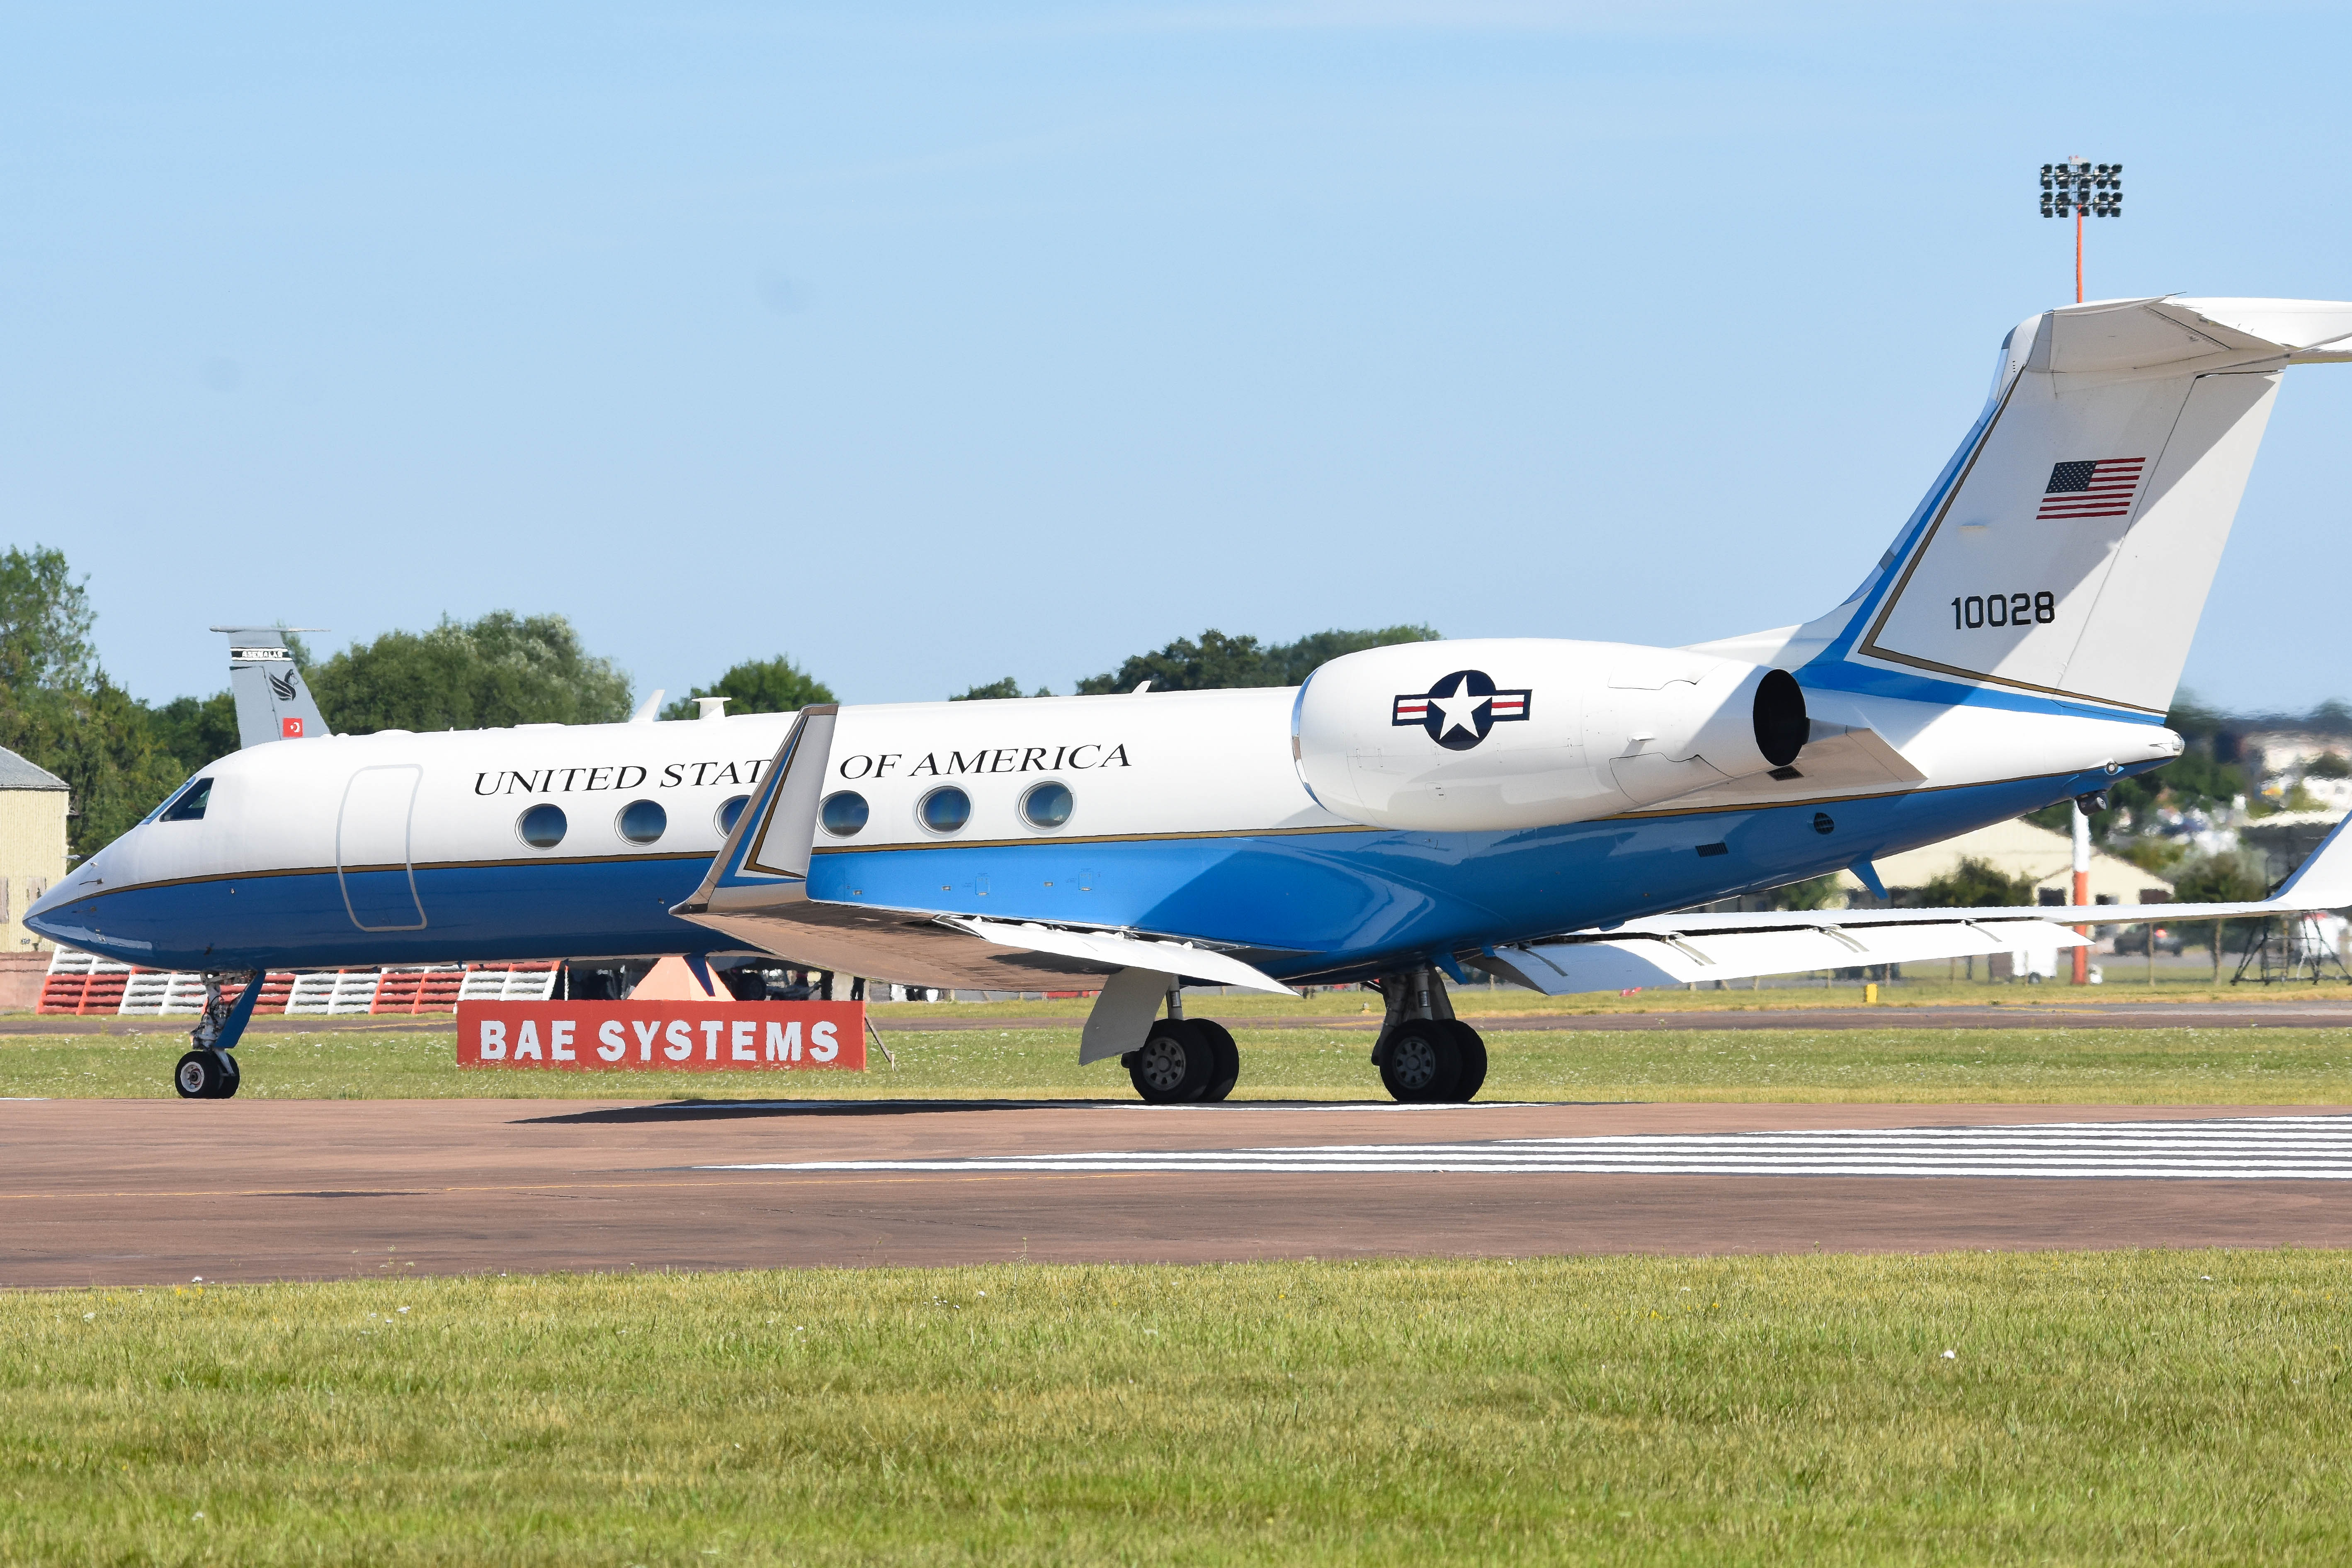 01-0028/010028 USAF - United States Air Force Gulfstream C-37A Photo by colinw - AVSpotters.com